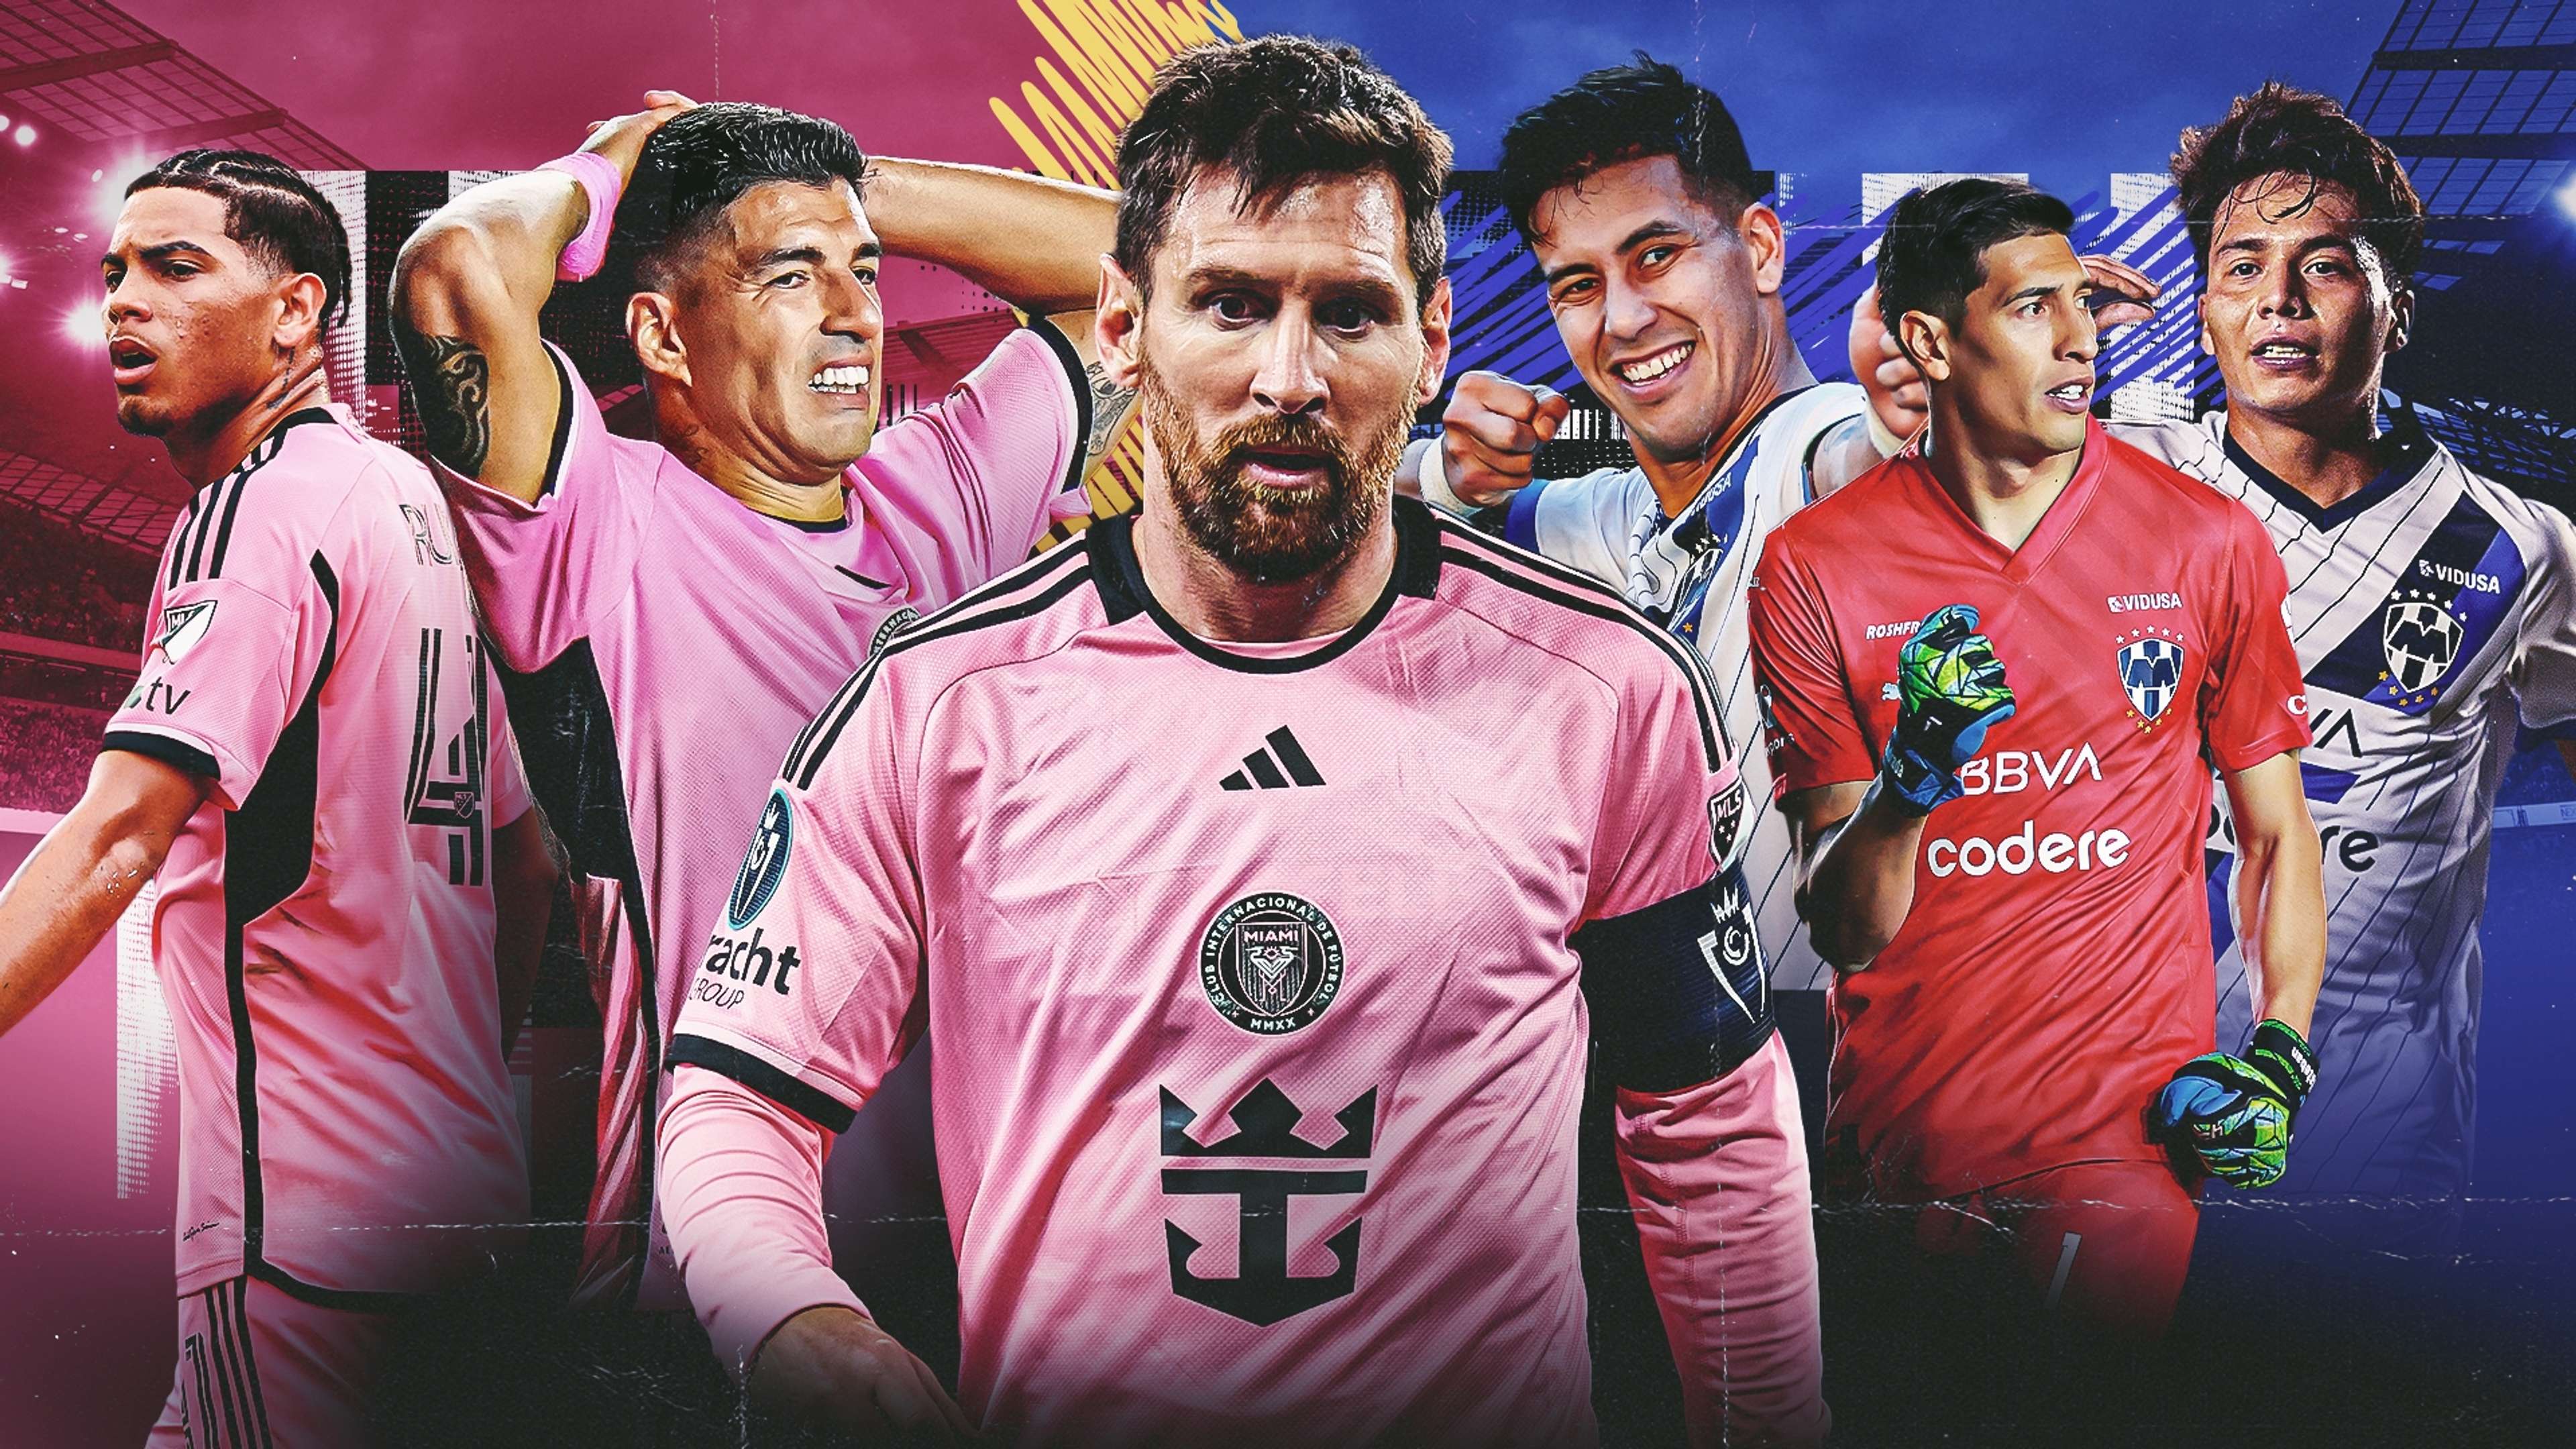 Mission (almost) Impossible? Lionel Messi's return offers Inter Miami hope  of doing what few other MLS teams can: Win in Mexico | Goal.com